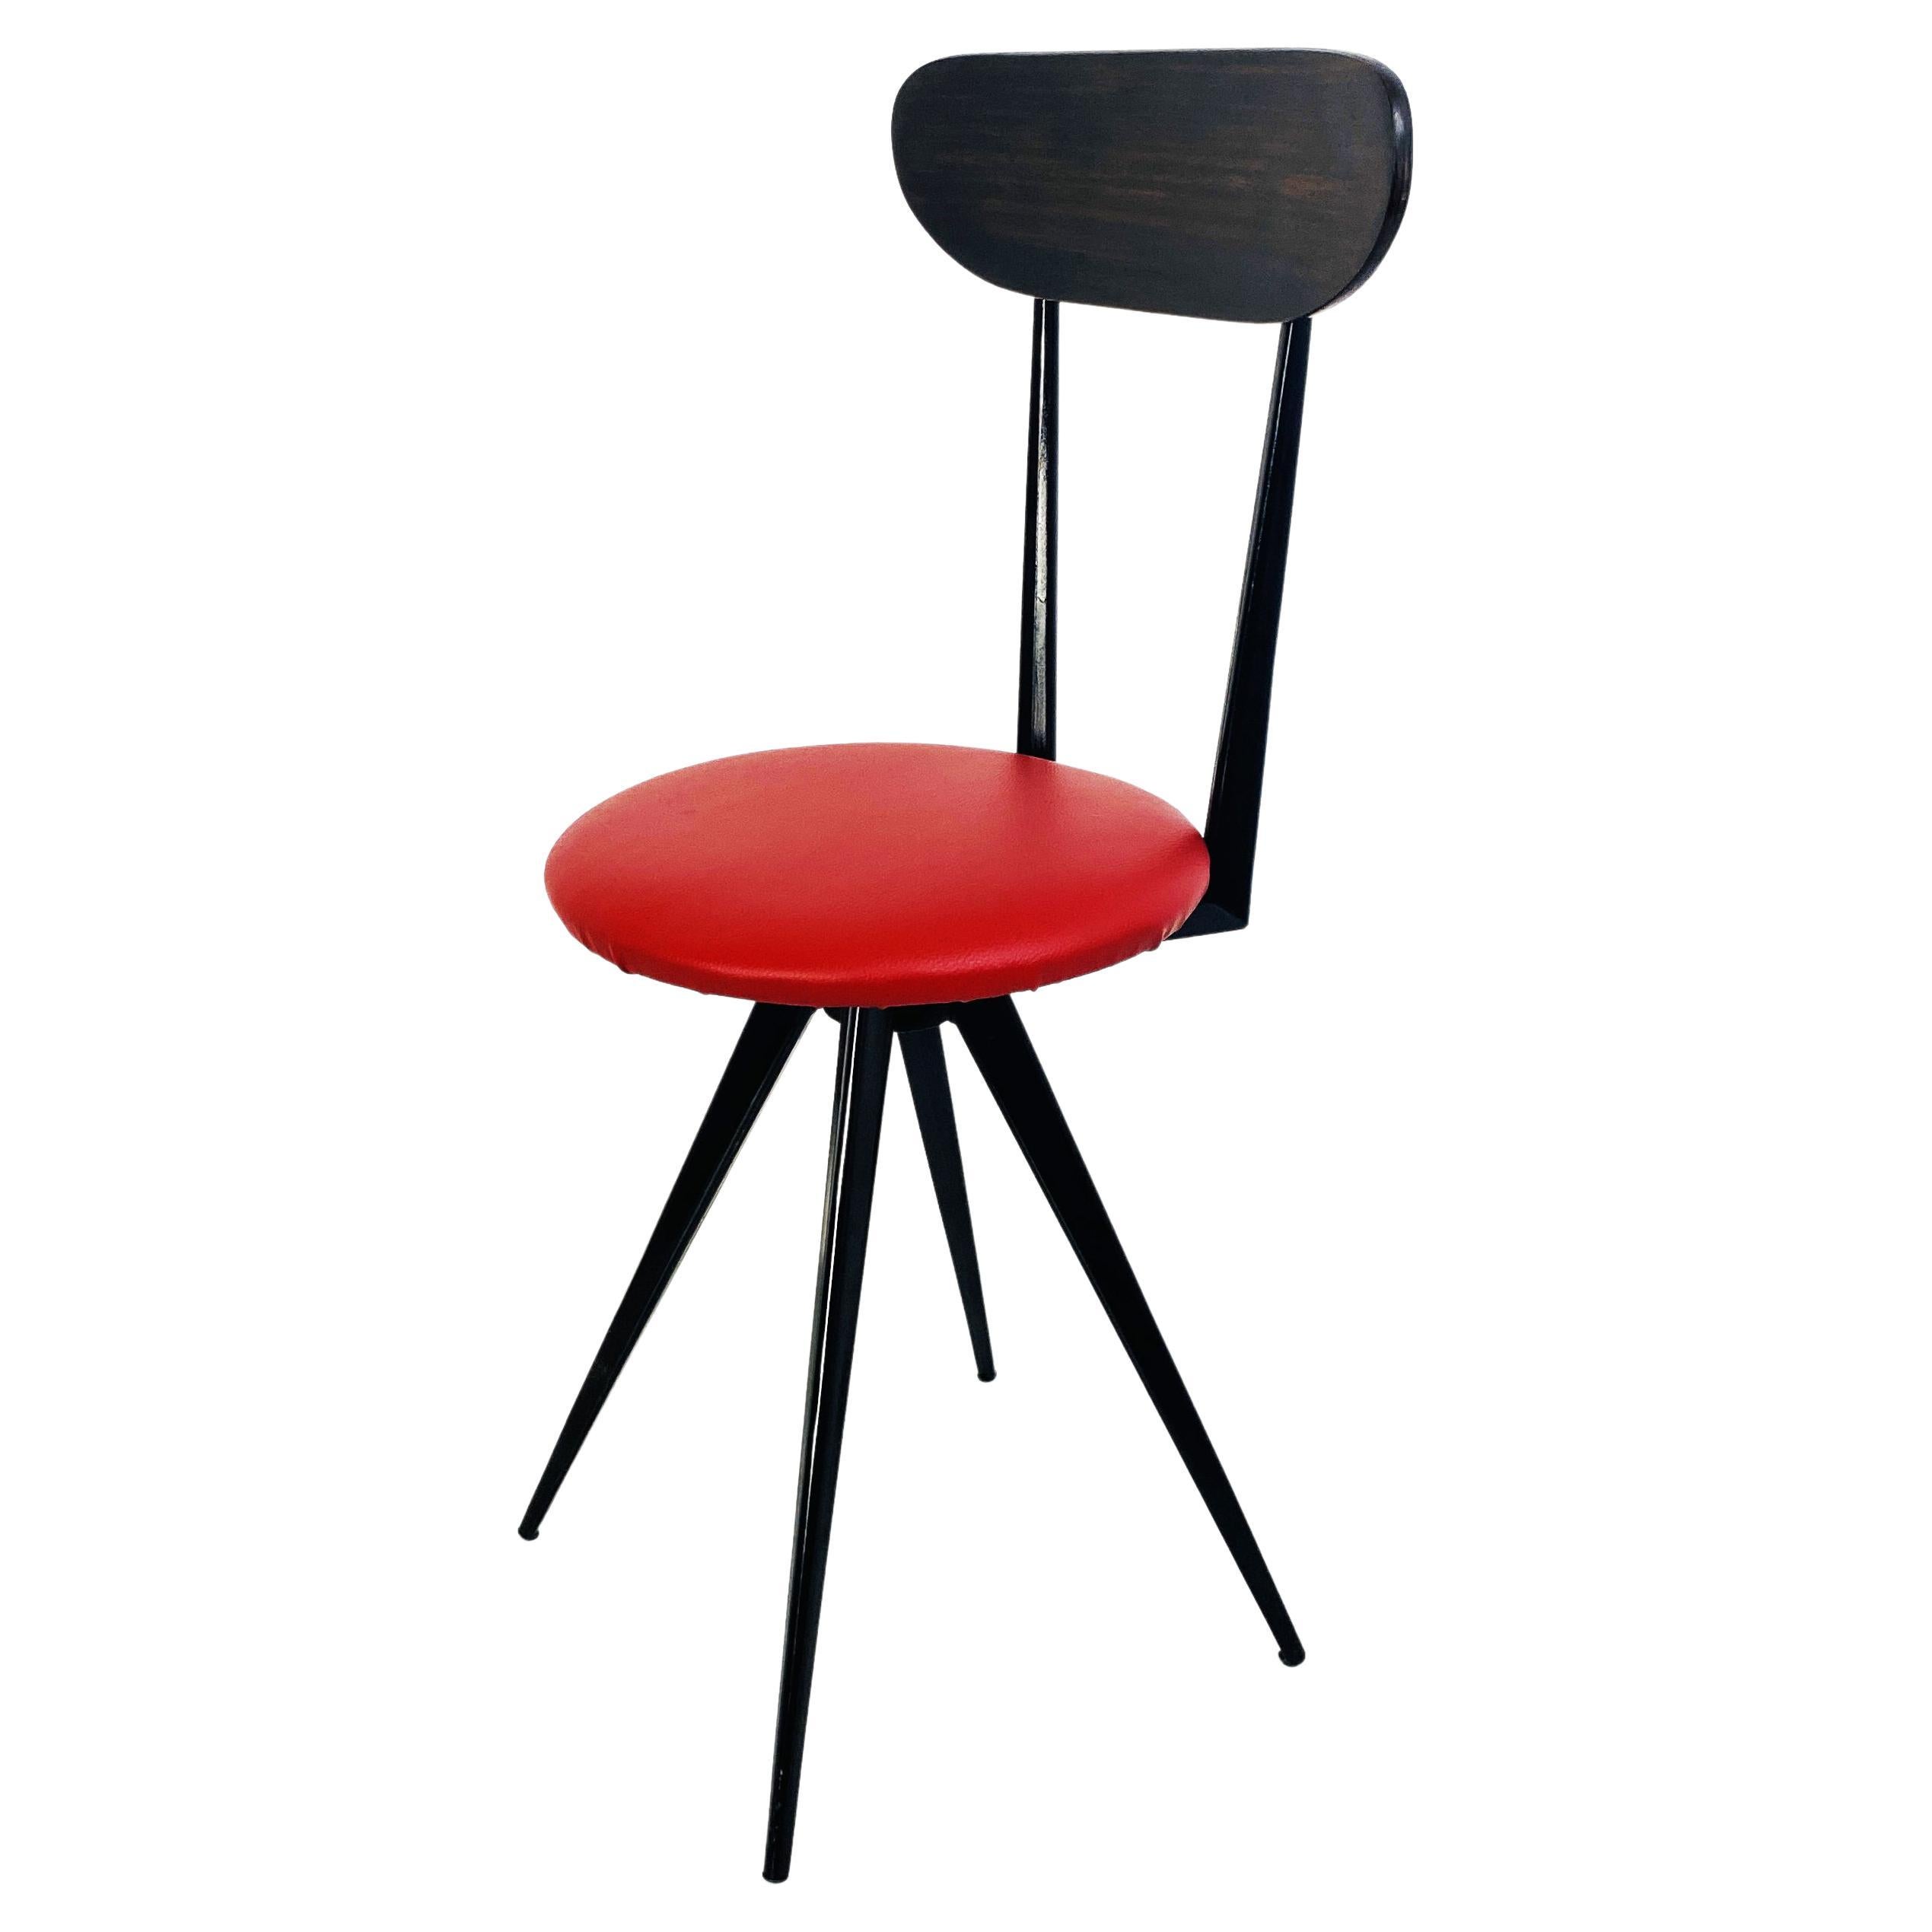 Italian Mid-Century Chair with Red Sky Seat, Metal and Wooded Structure, 1960s